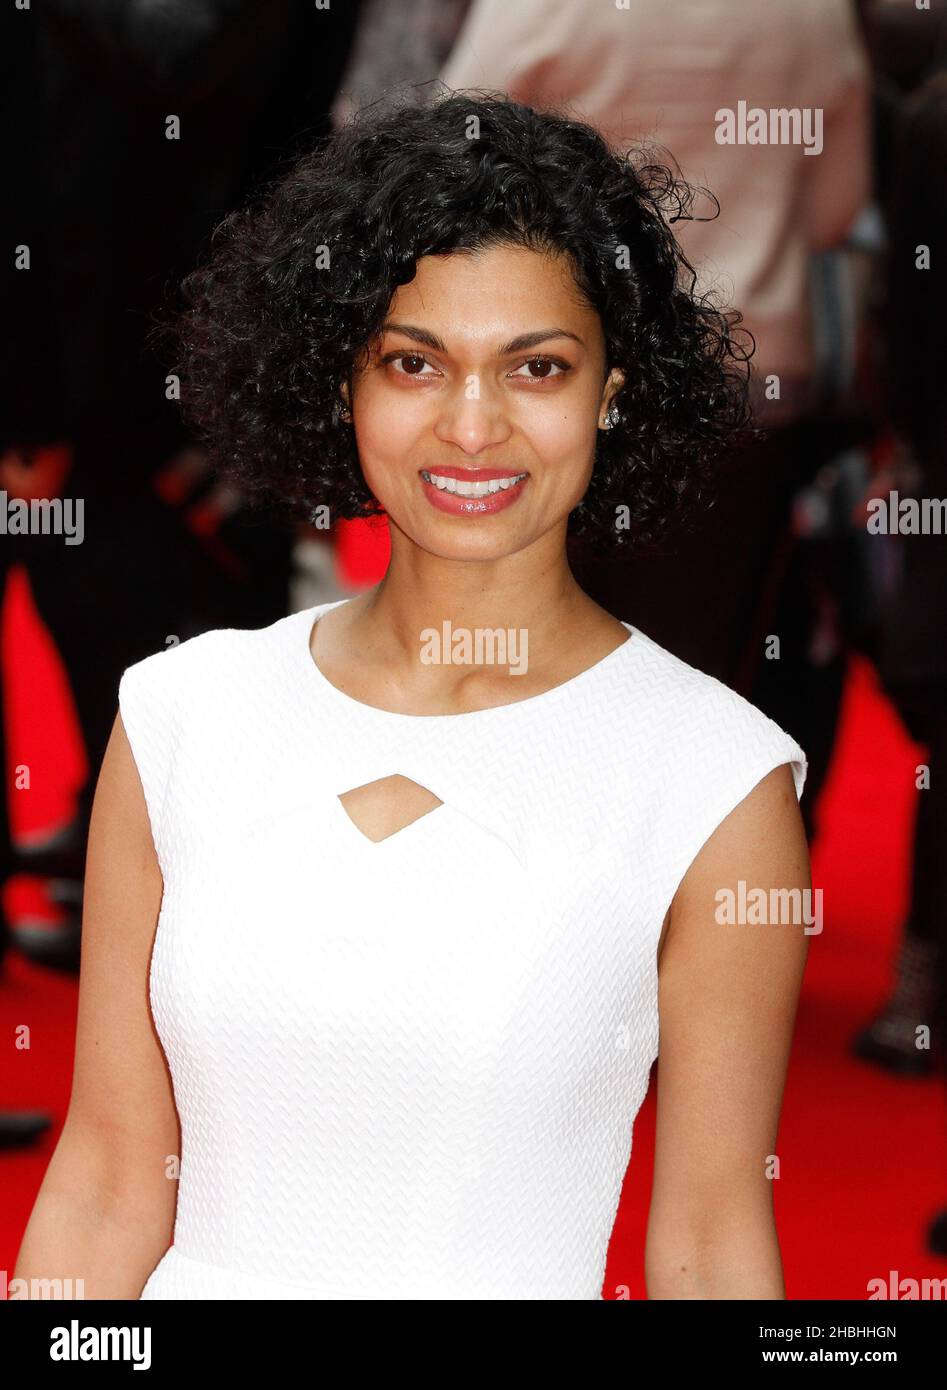 Randa Ayoubi attending the Postman Pat The Movie World Premier at The West End Odeon in Leicester Square in London. Stock Photo